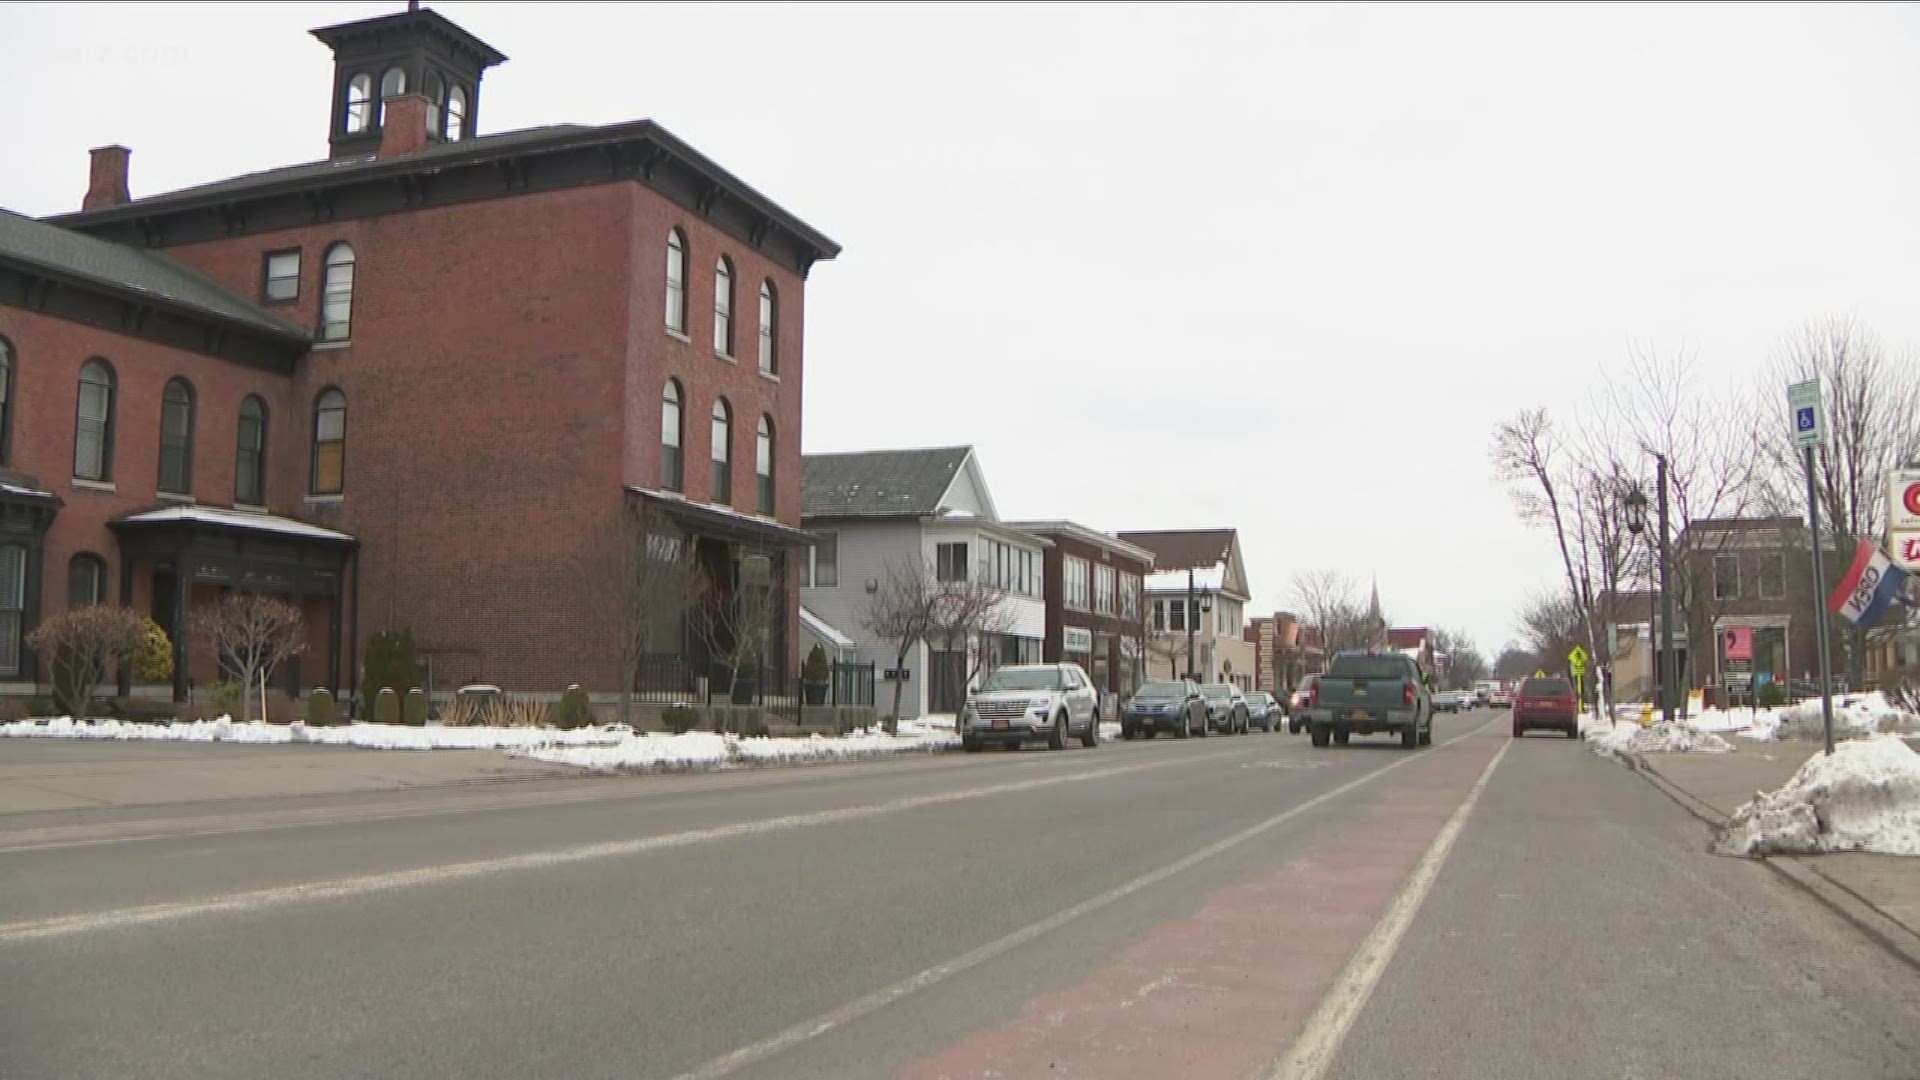 There are concerns in the Town of Hamburg tonight over governor Cuomo's budget proposal that the town supervisor says could lead to major cuts or big tax increases.